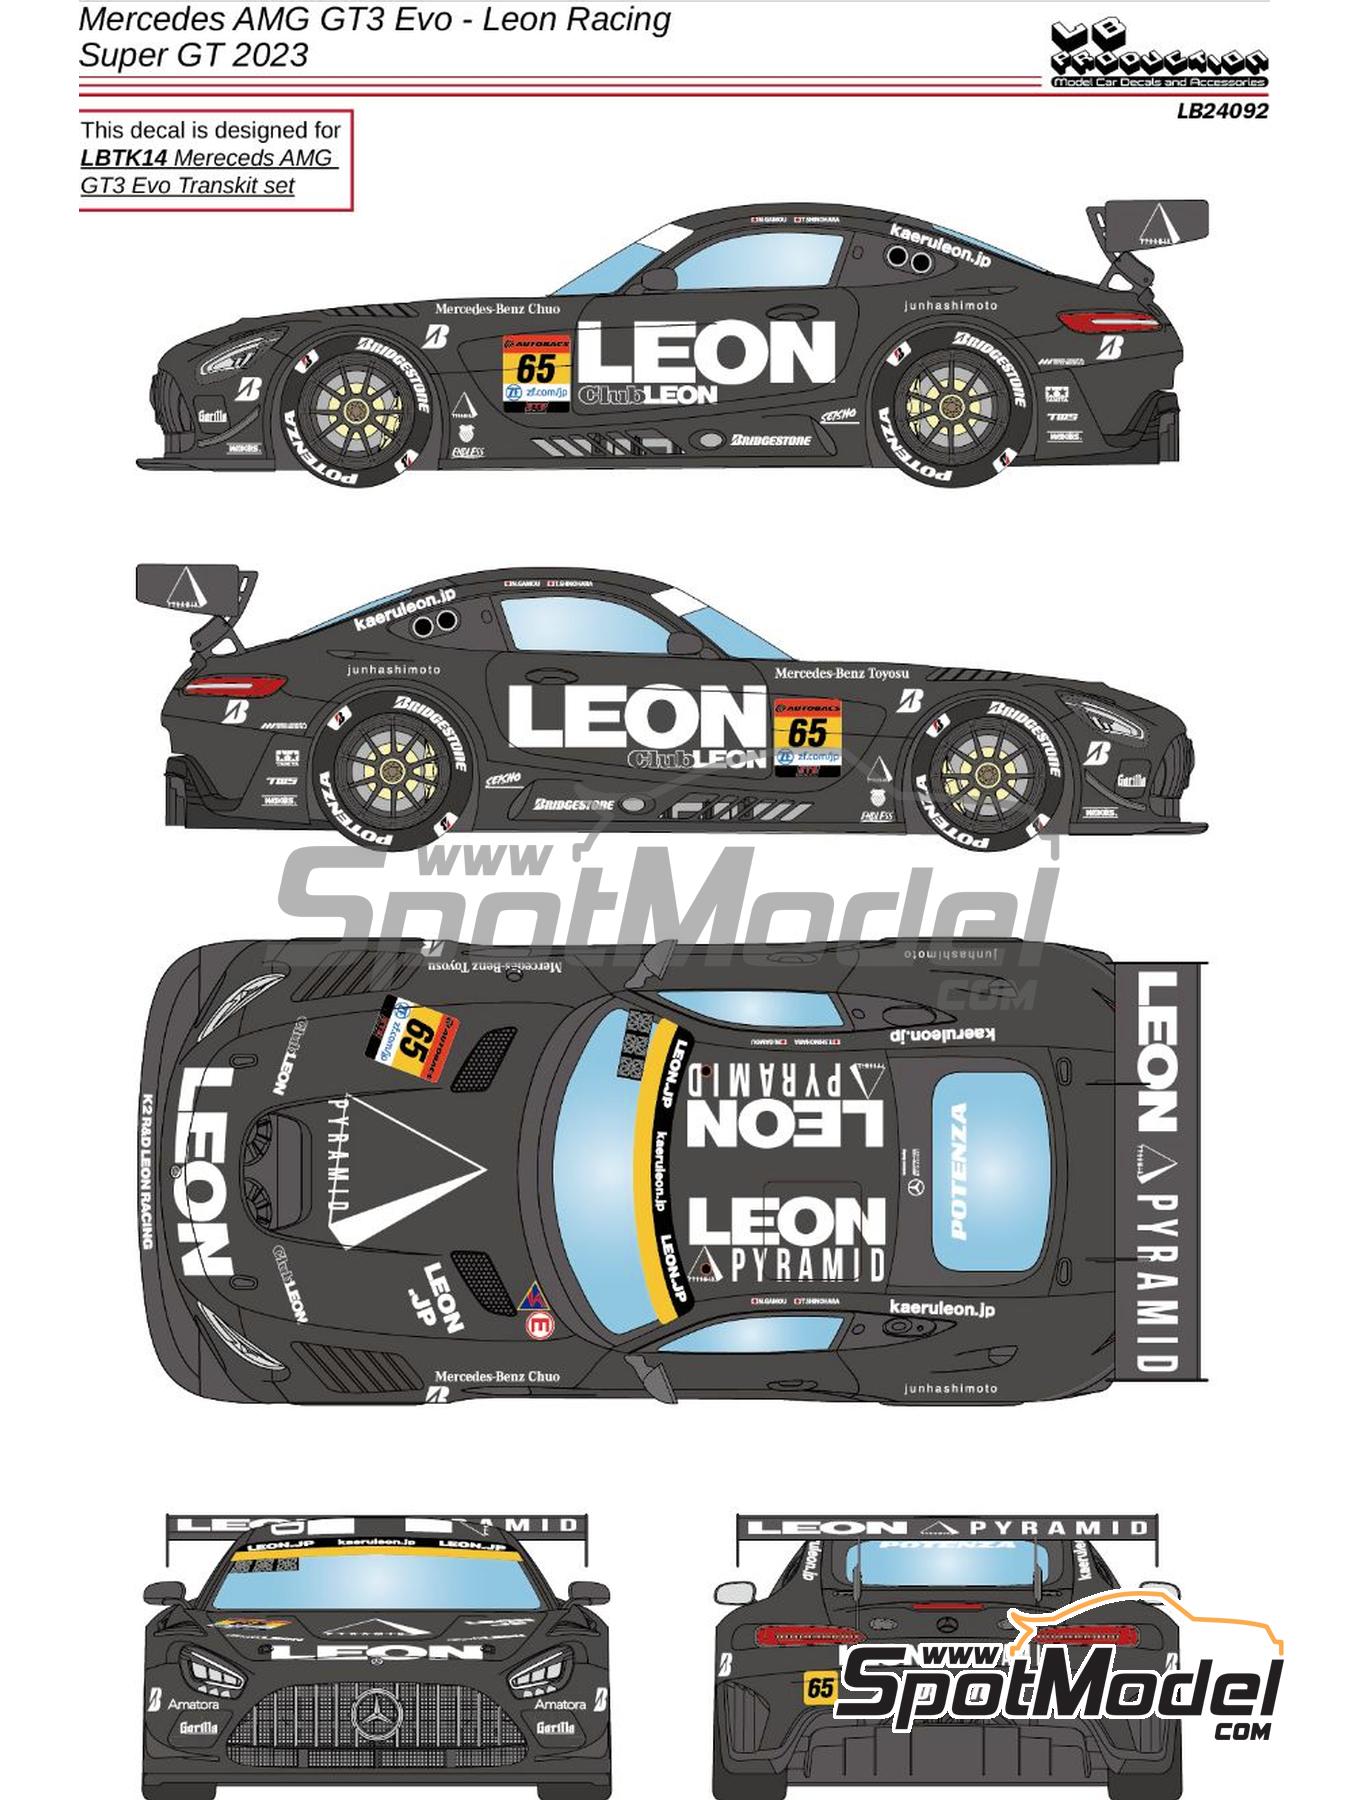 Mercedes Benz AMG GT3 Evo Leon Racing Team - Autobacs Super GT Series 2023.  Marking / livery in 1/24 scale manufactured by LB Production (ref. LB-2409